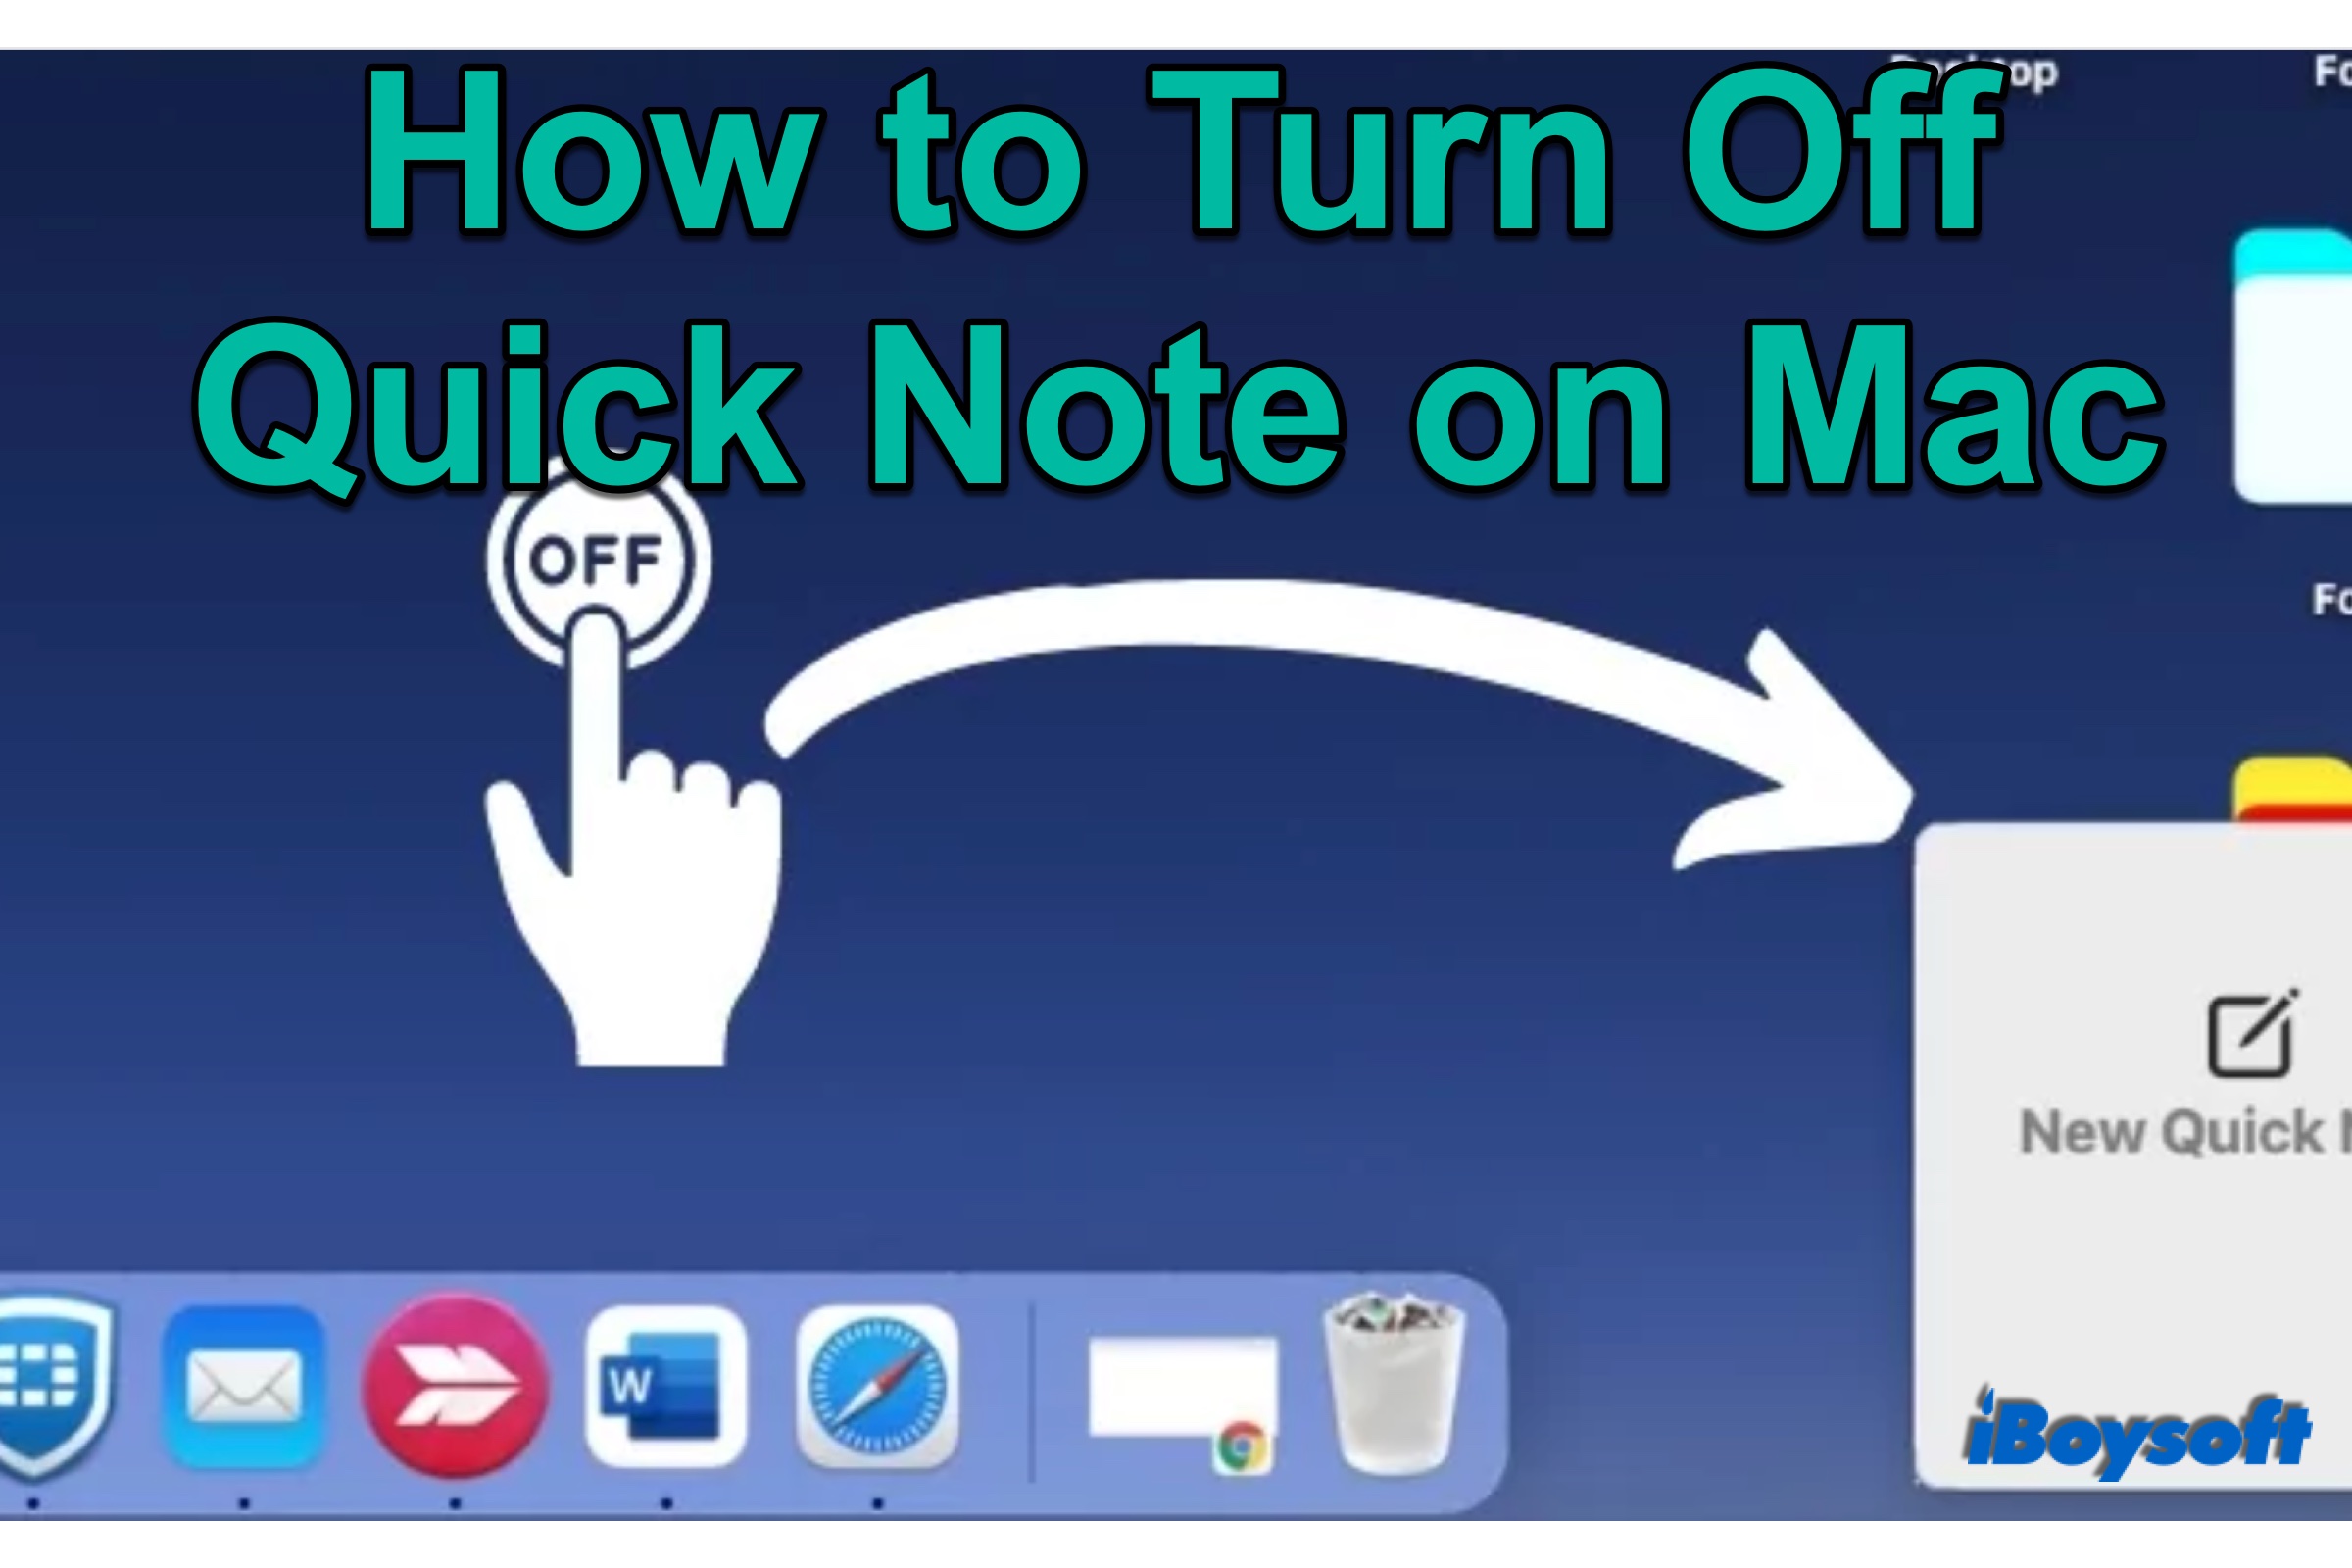 how to turn off quick note on Mac